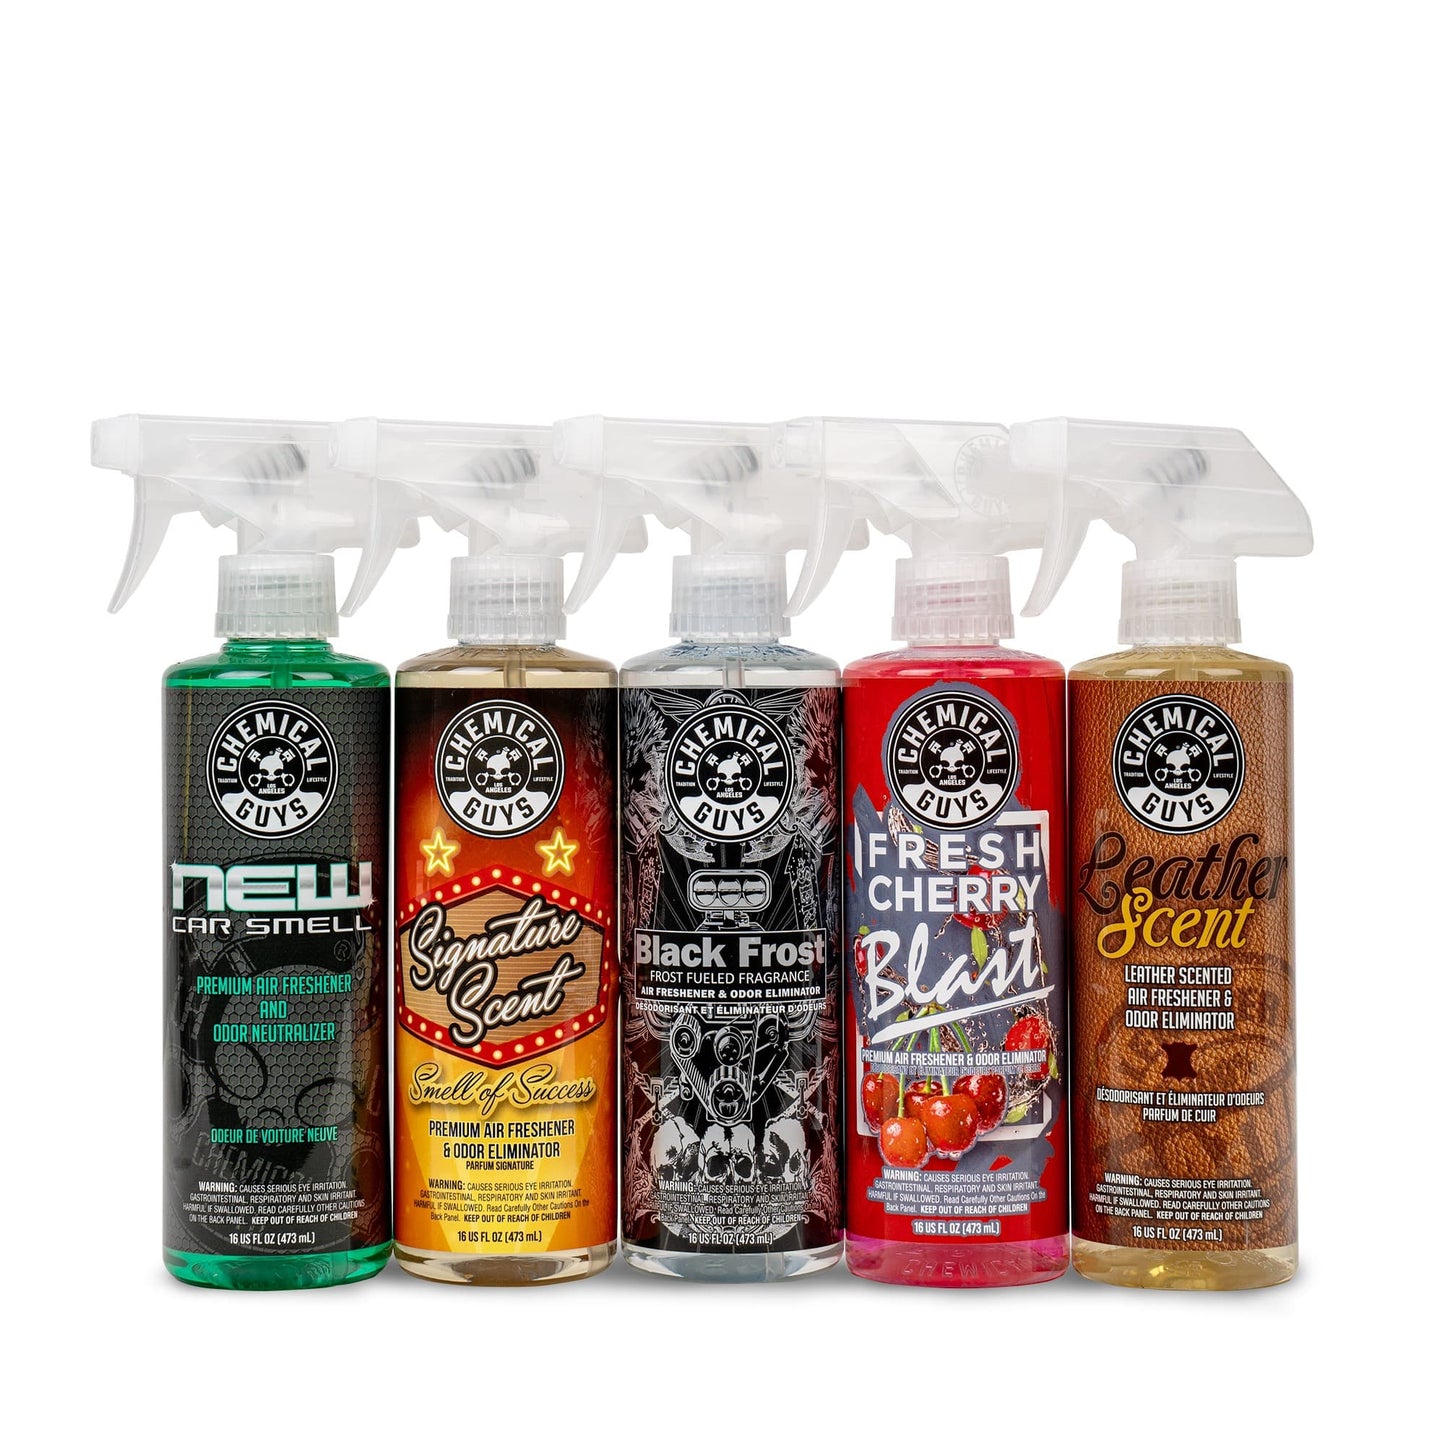 Chemical Guys New Car Scent Air Freshener 16oz – in2Detailing